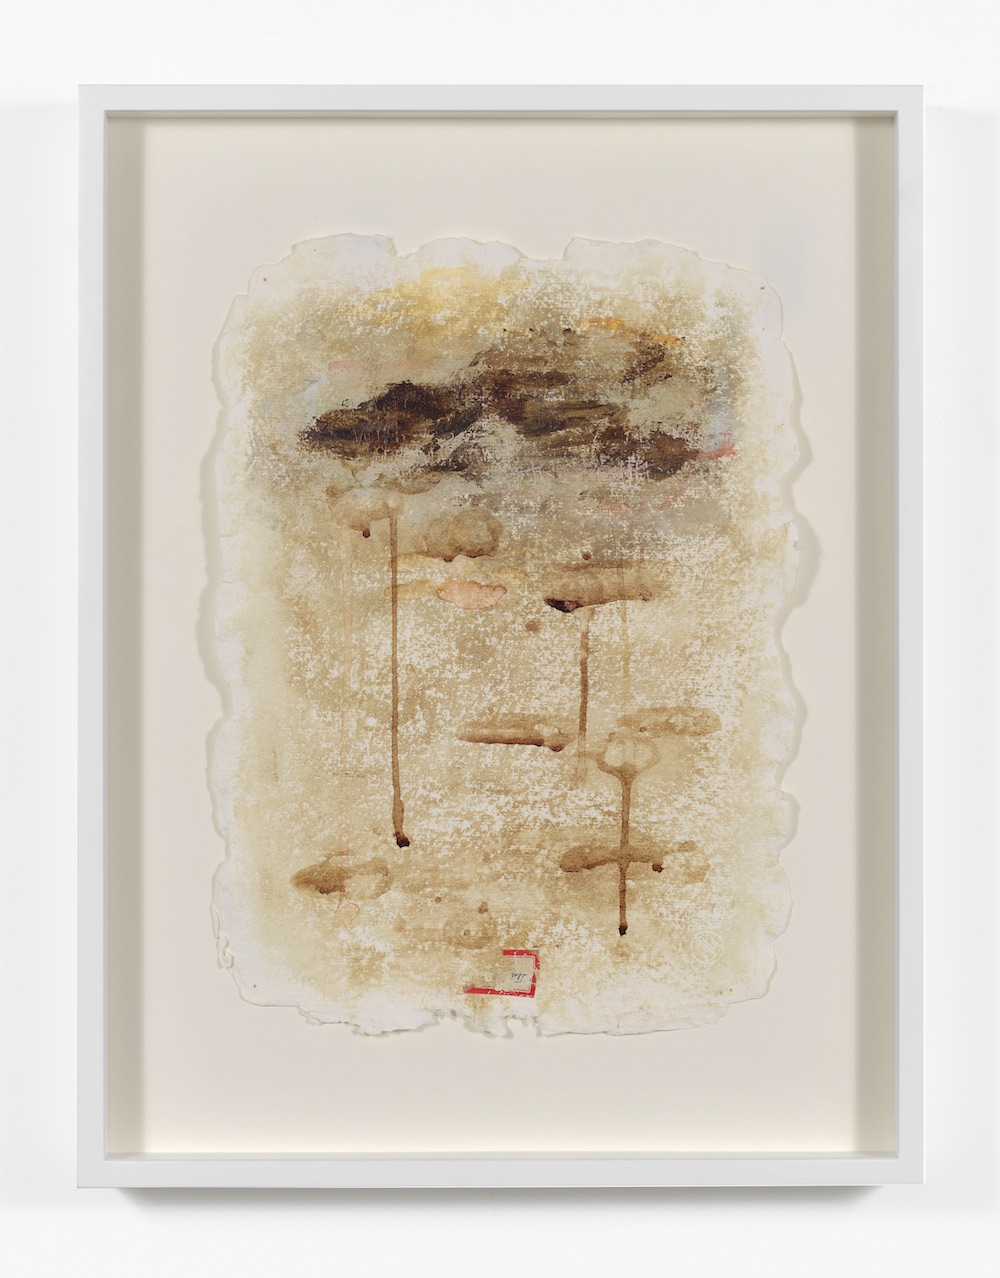 Harmony Hammond, Blood Journals (Giorno 1 â€“ X) , 1994. Menstrual blood, watercolour, charcoal, ink, stickers on paper (10 pages). Each 38.10 x 27.94 cm. Courtesy of the artist and Alexander Gray Associates, New York Photo_ Jeffrey Sturges